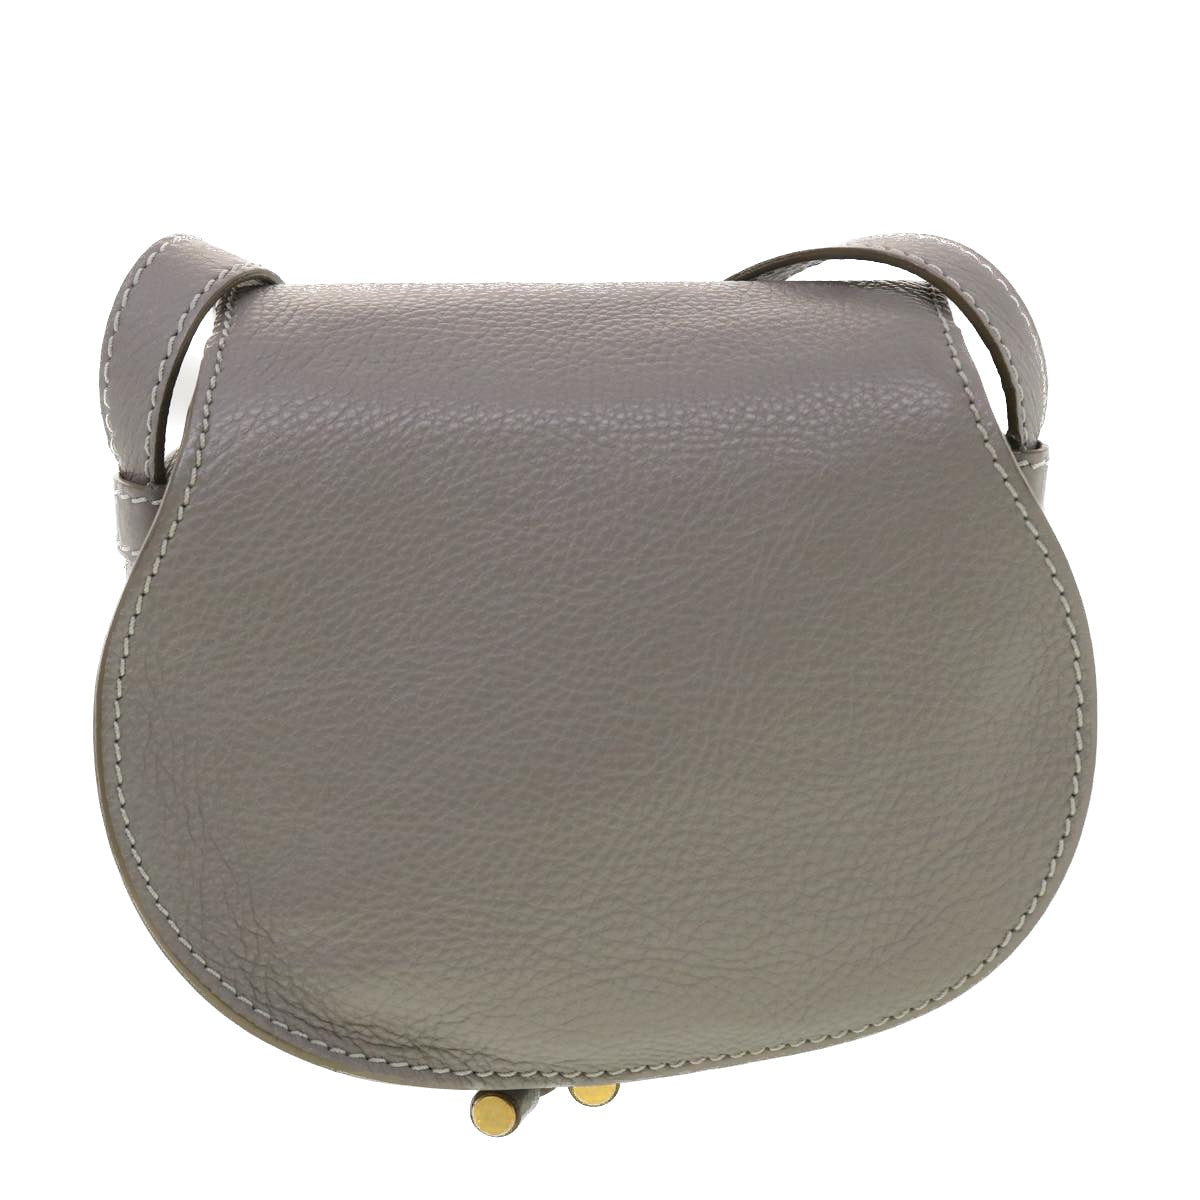 Chloe Mercy Small Saddle Shoulder Bag Leather Gray Auth am4200 - 0